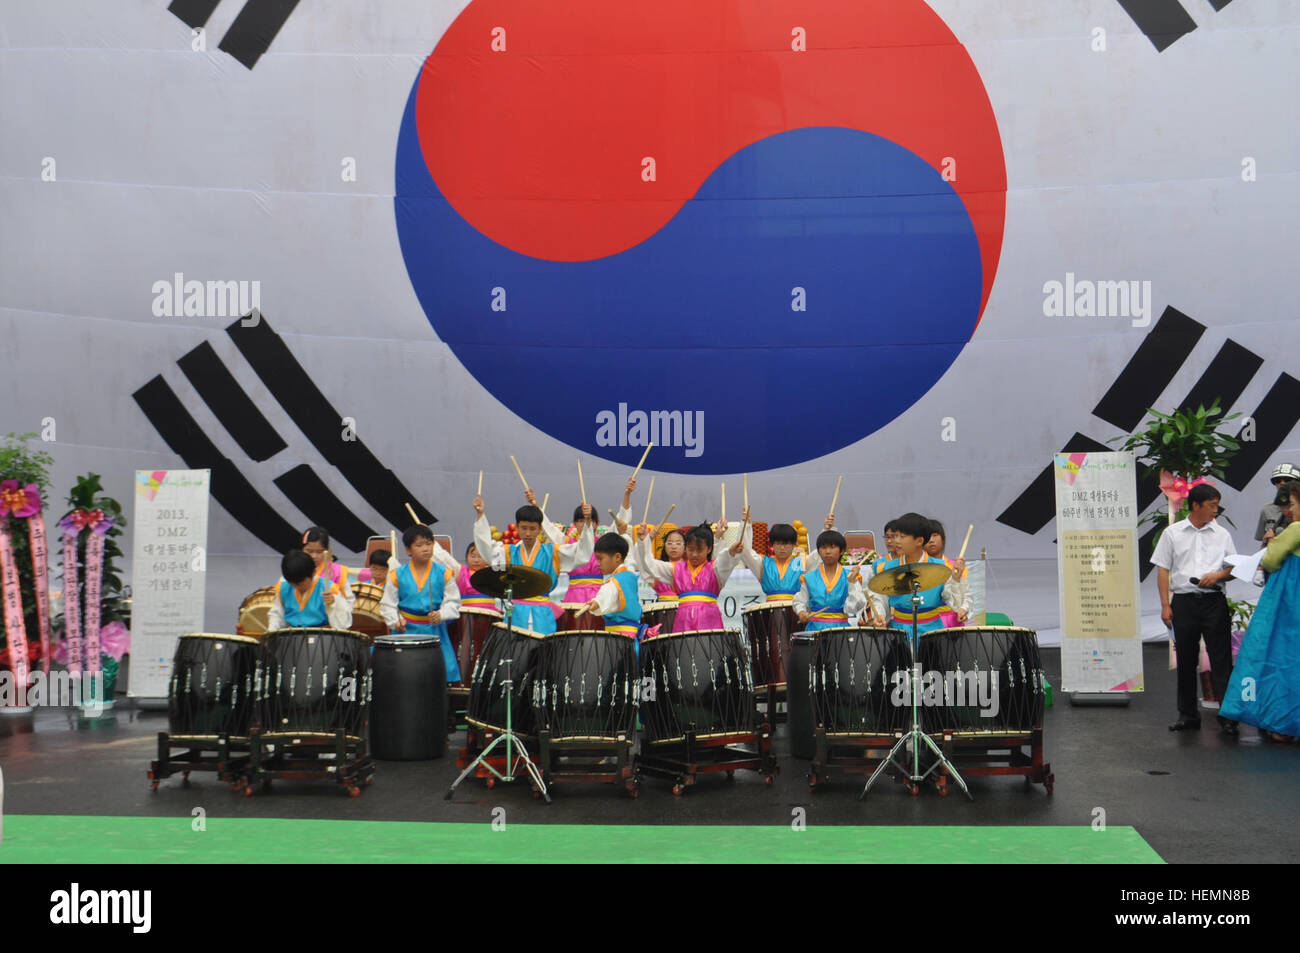 Taeseongdong Elementary School percussion band performs during the Taeseongdong Village 60th anniversary celebration in the Joint Security Area of the Demilitarized Zone, South Korea, Aug. 2, 2013. The ceremony marked the establishment of the small village, known as 'Freedom Village,' after the signing of the Korean War Armistice in 1953. (U.S. Army photo by Capt. Kelly E. McKenzie, 210th Fires Brigade Public Affairs Officer/Released) Col. Lawson visits Taeseongdong 130802-A-TN121-089 Stock Photo